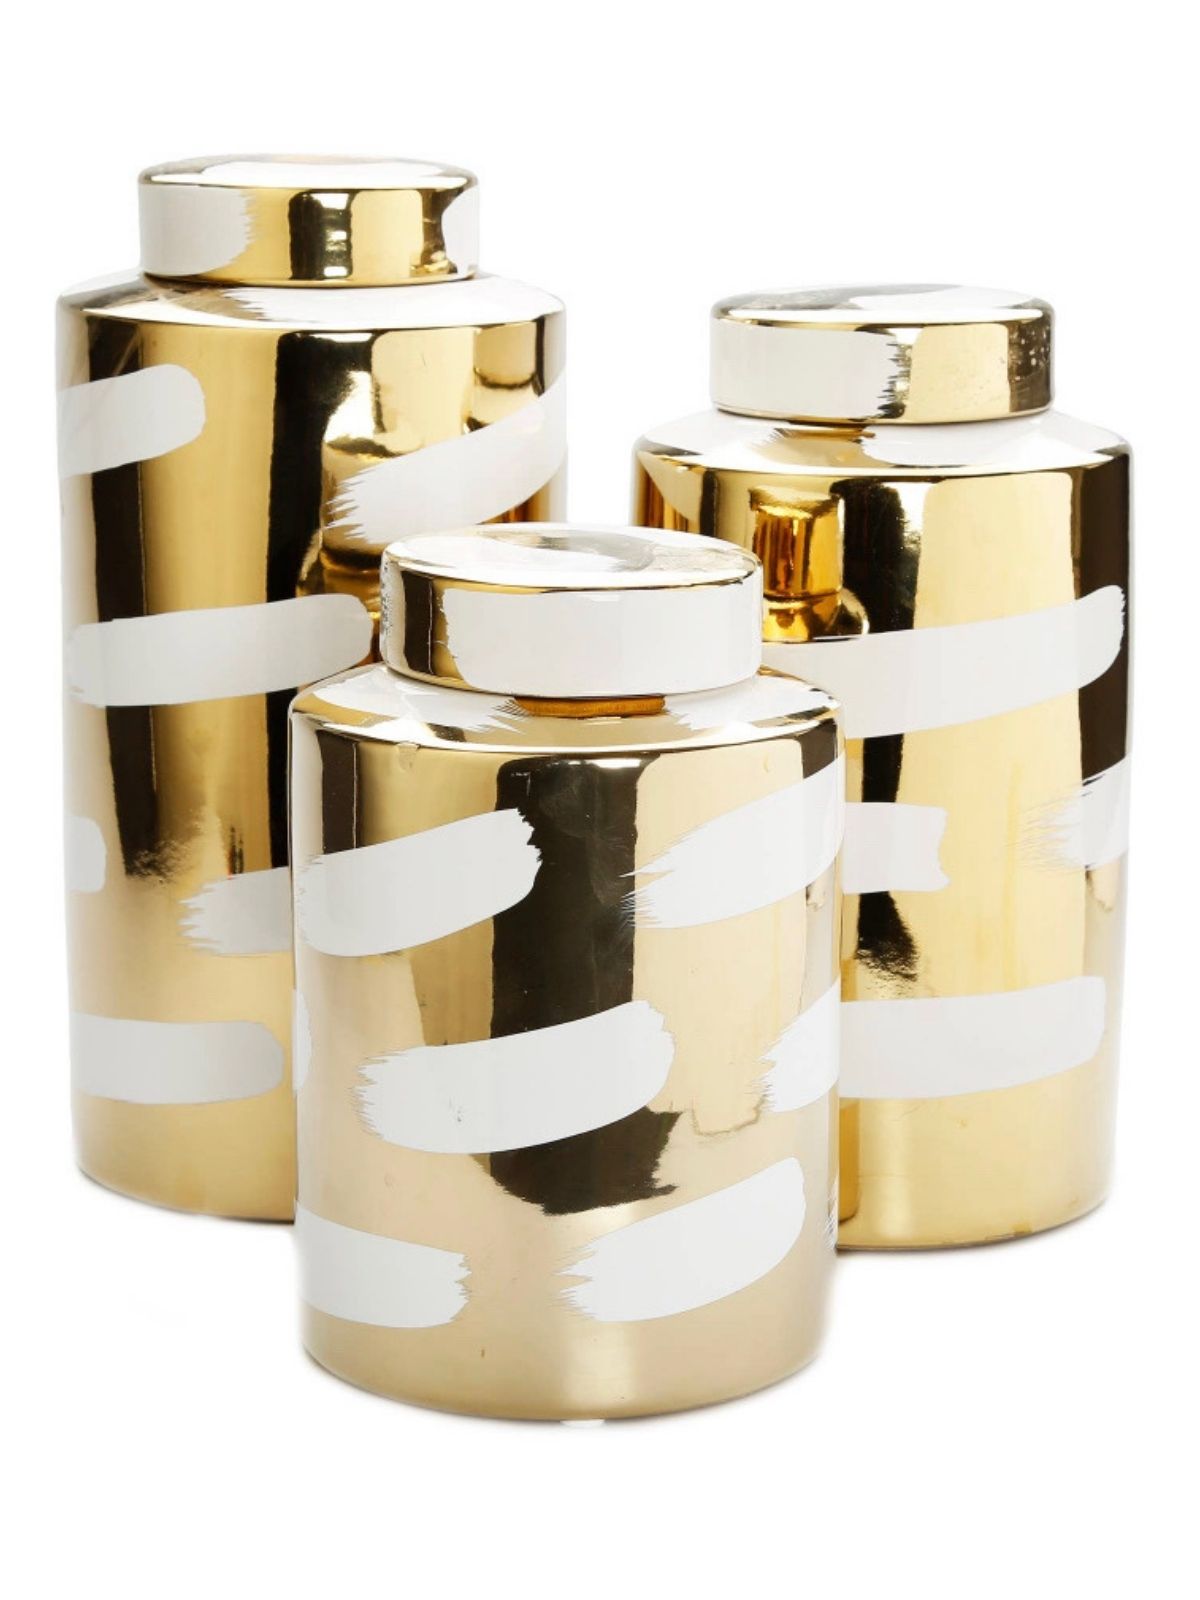 Stunning Gold Ceramic Decorative Jars With Lids and Luxurious White Brushstroke Design - KYA Home Decor